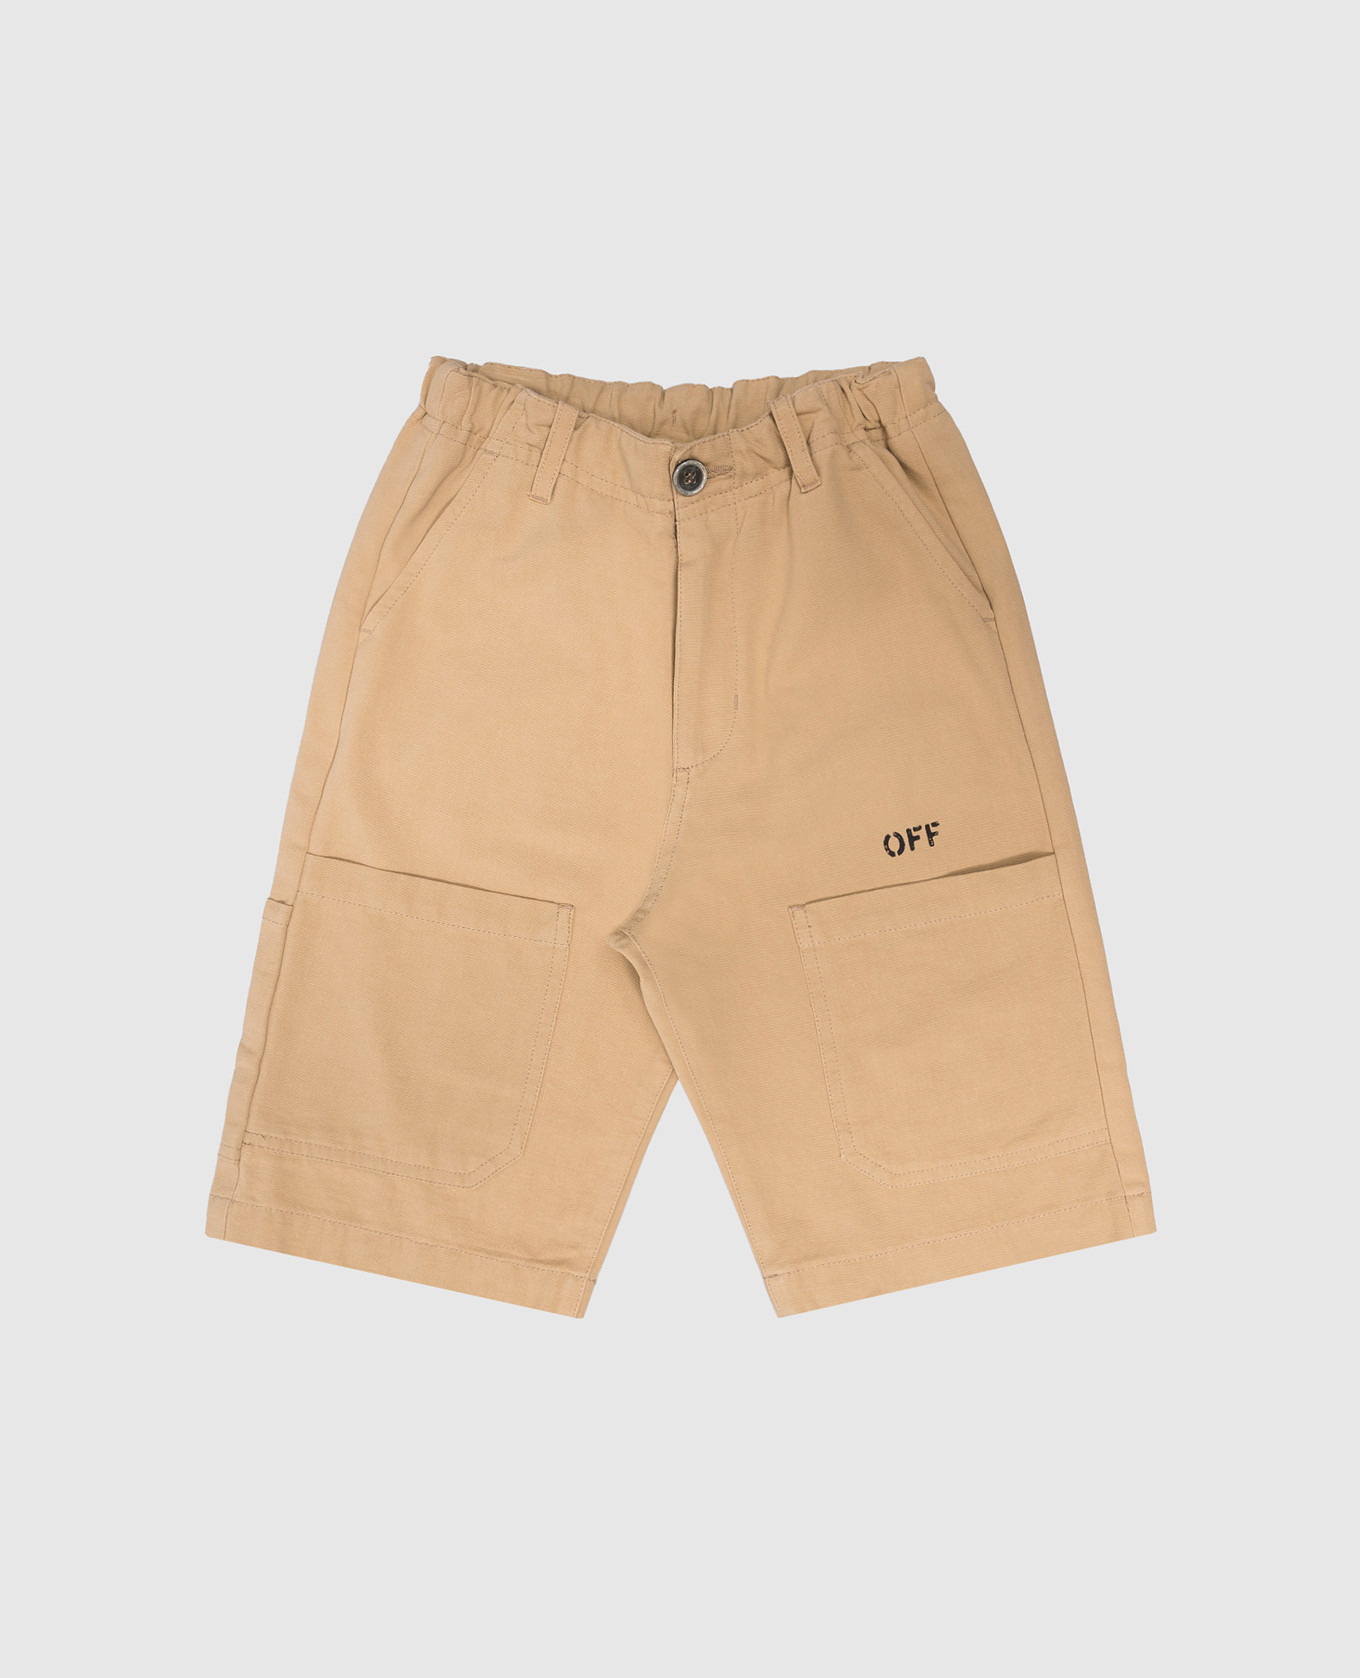 Children's brown shorts with logo print